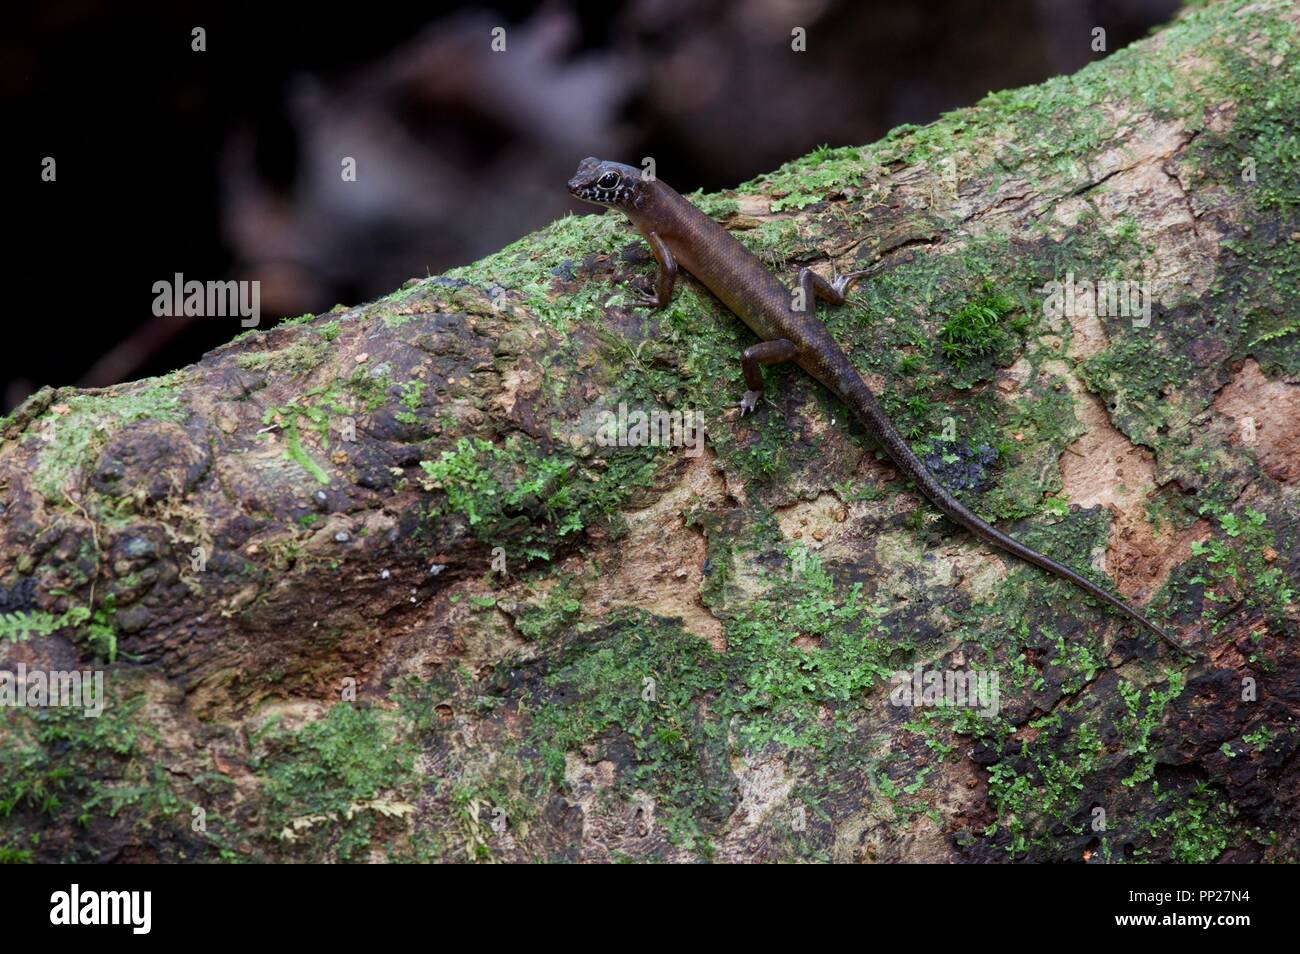 A Sabah Slender Skink (Sphenomorphus sabanus) perched on a mossy log in Danum Valley Conservation Area, Sabah, East Malaysia, Borneo Stock Photo